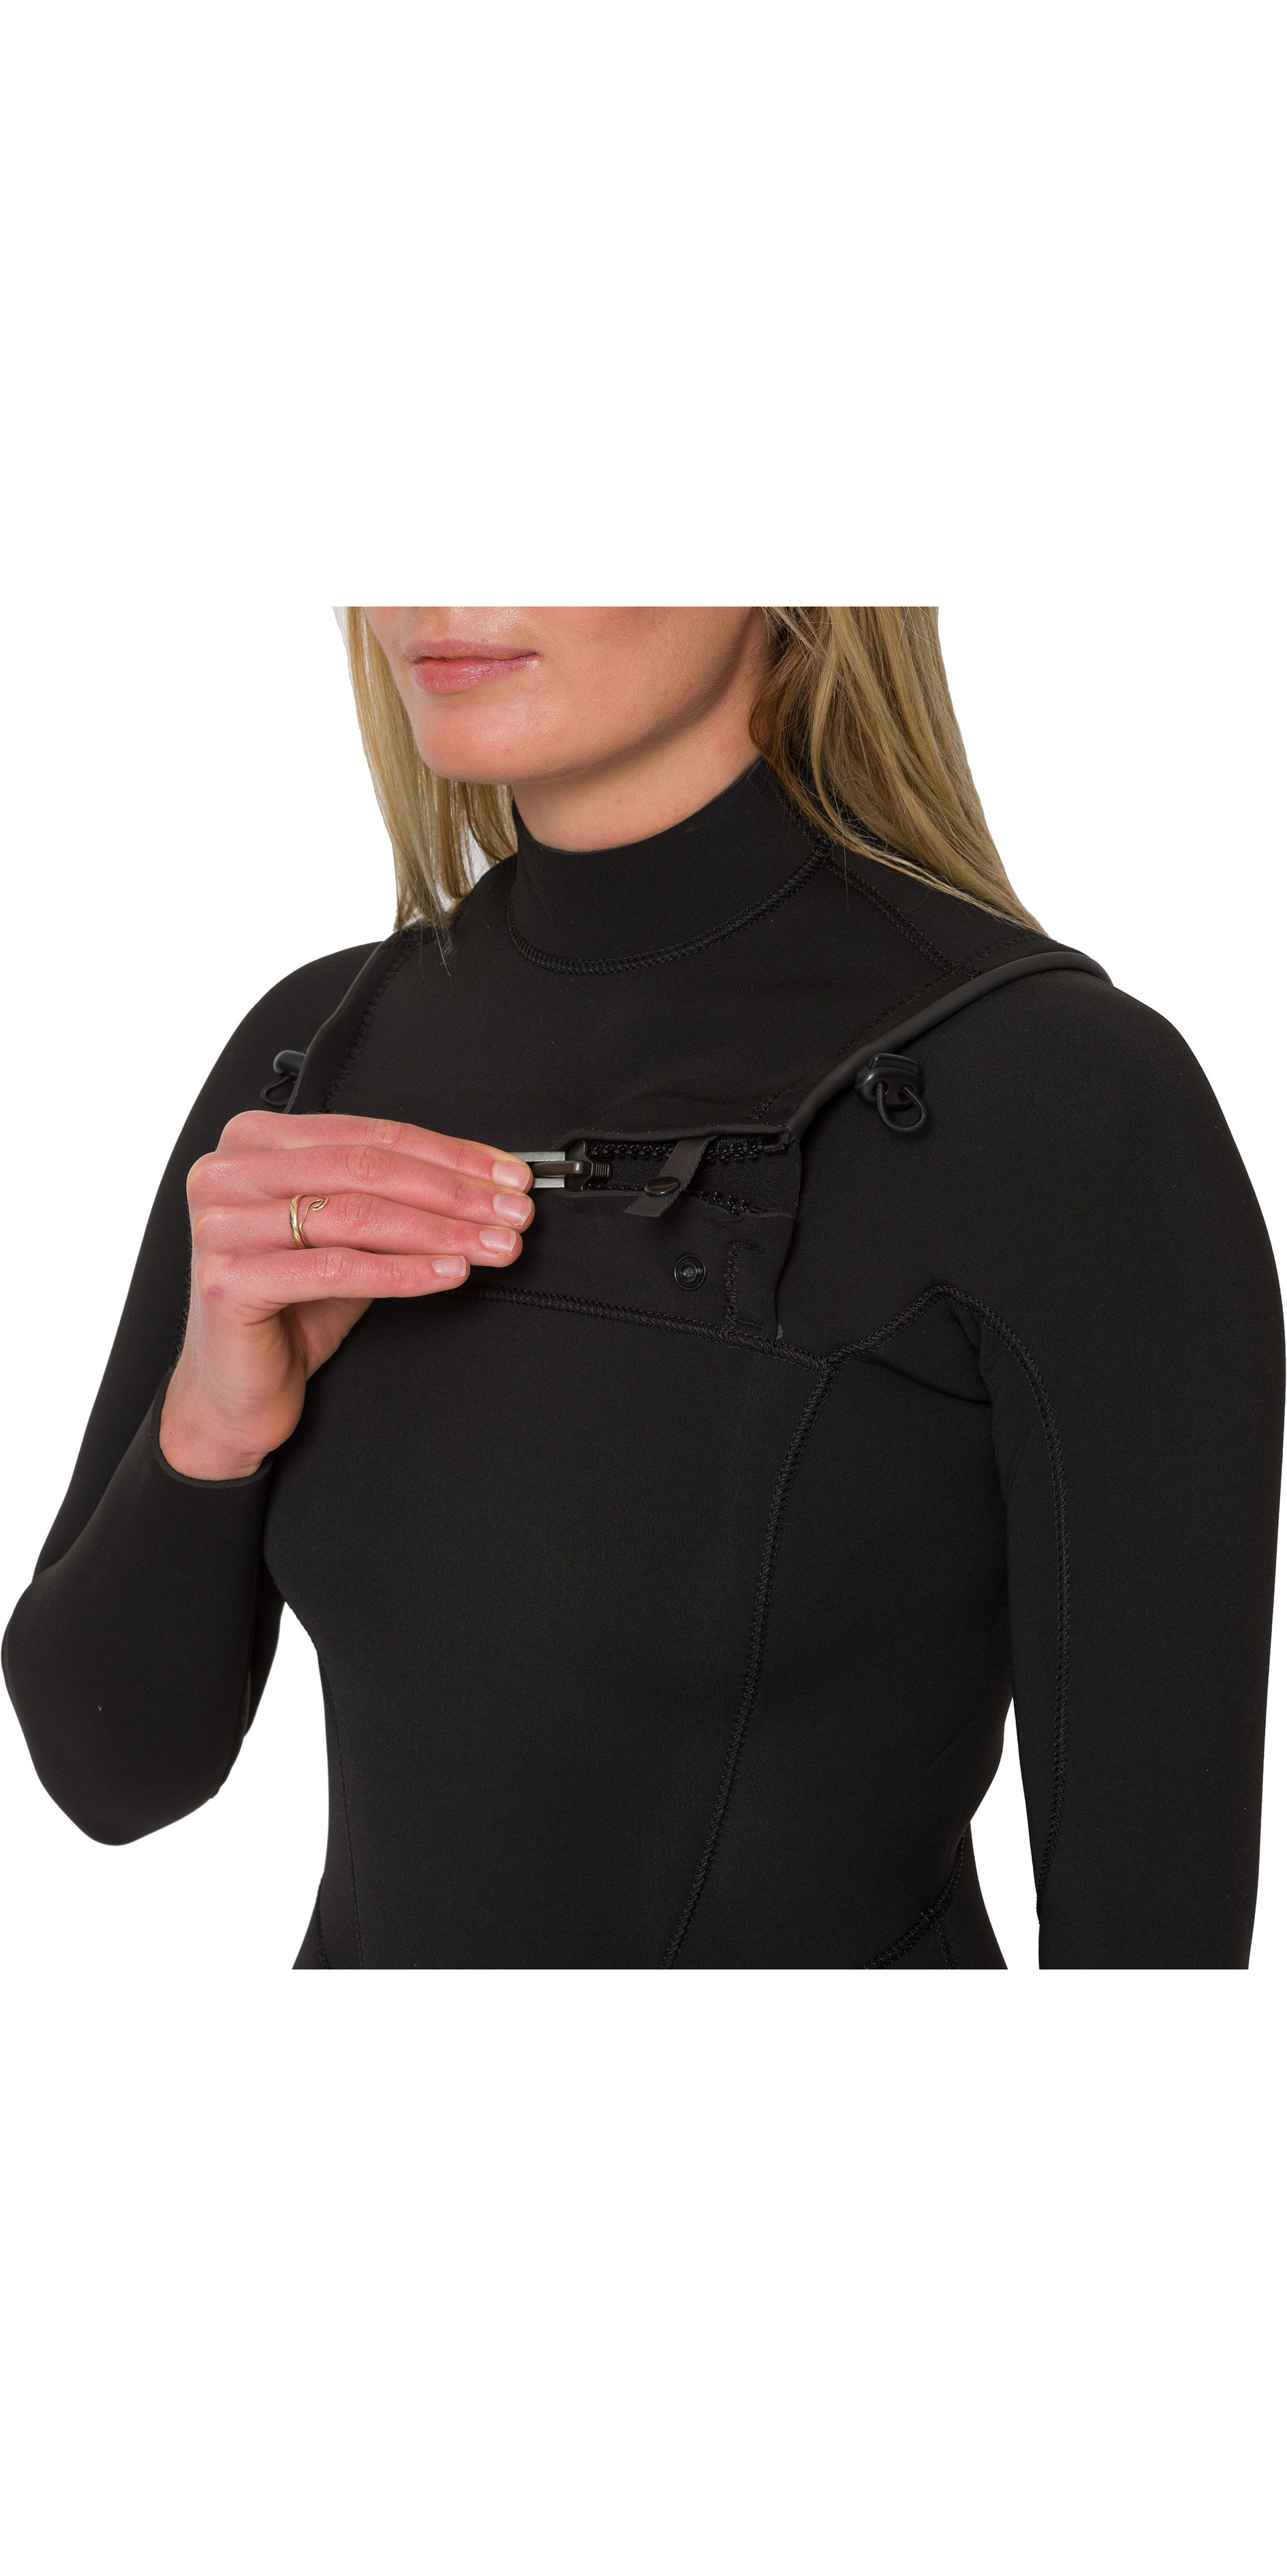 Animal Womens Phoenix 5//4//3mm GBS Chest Zip Wetsuit in Black Easy Stretch Ultimate Stretch and Warmth